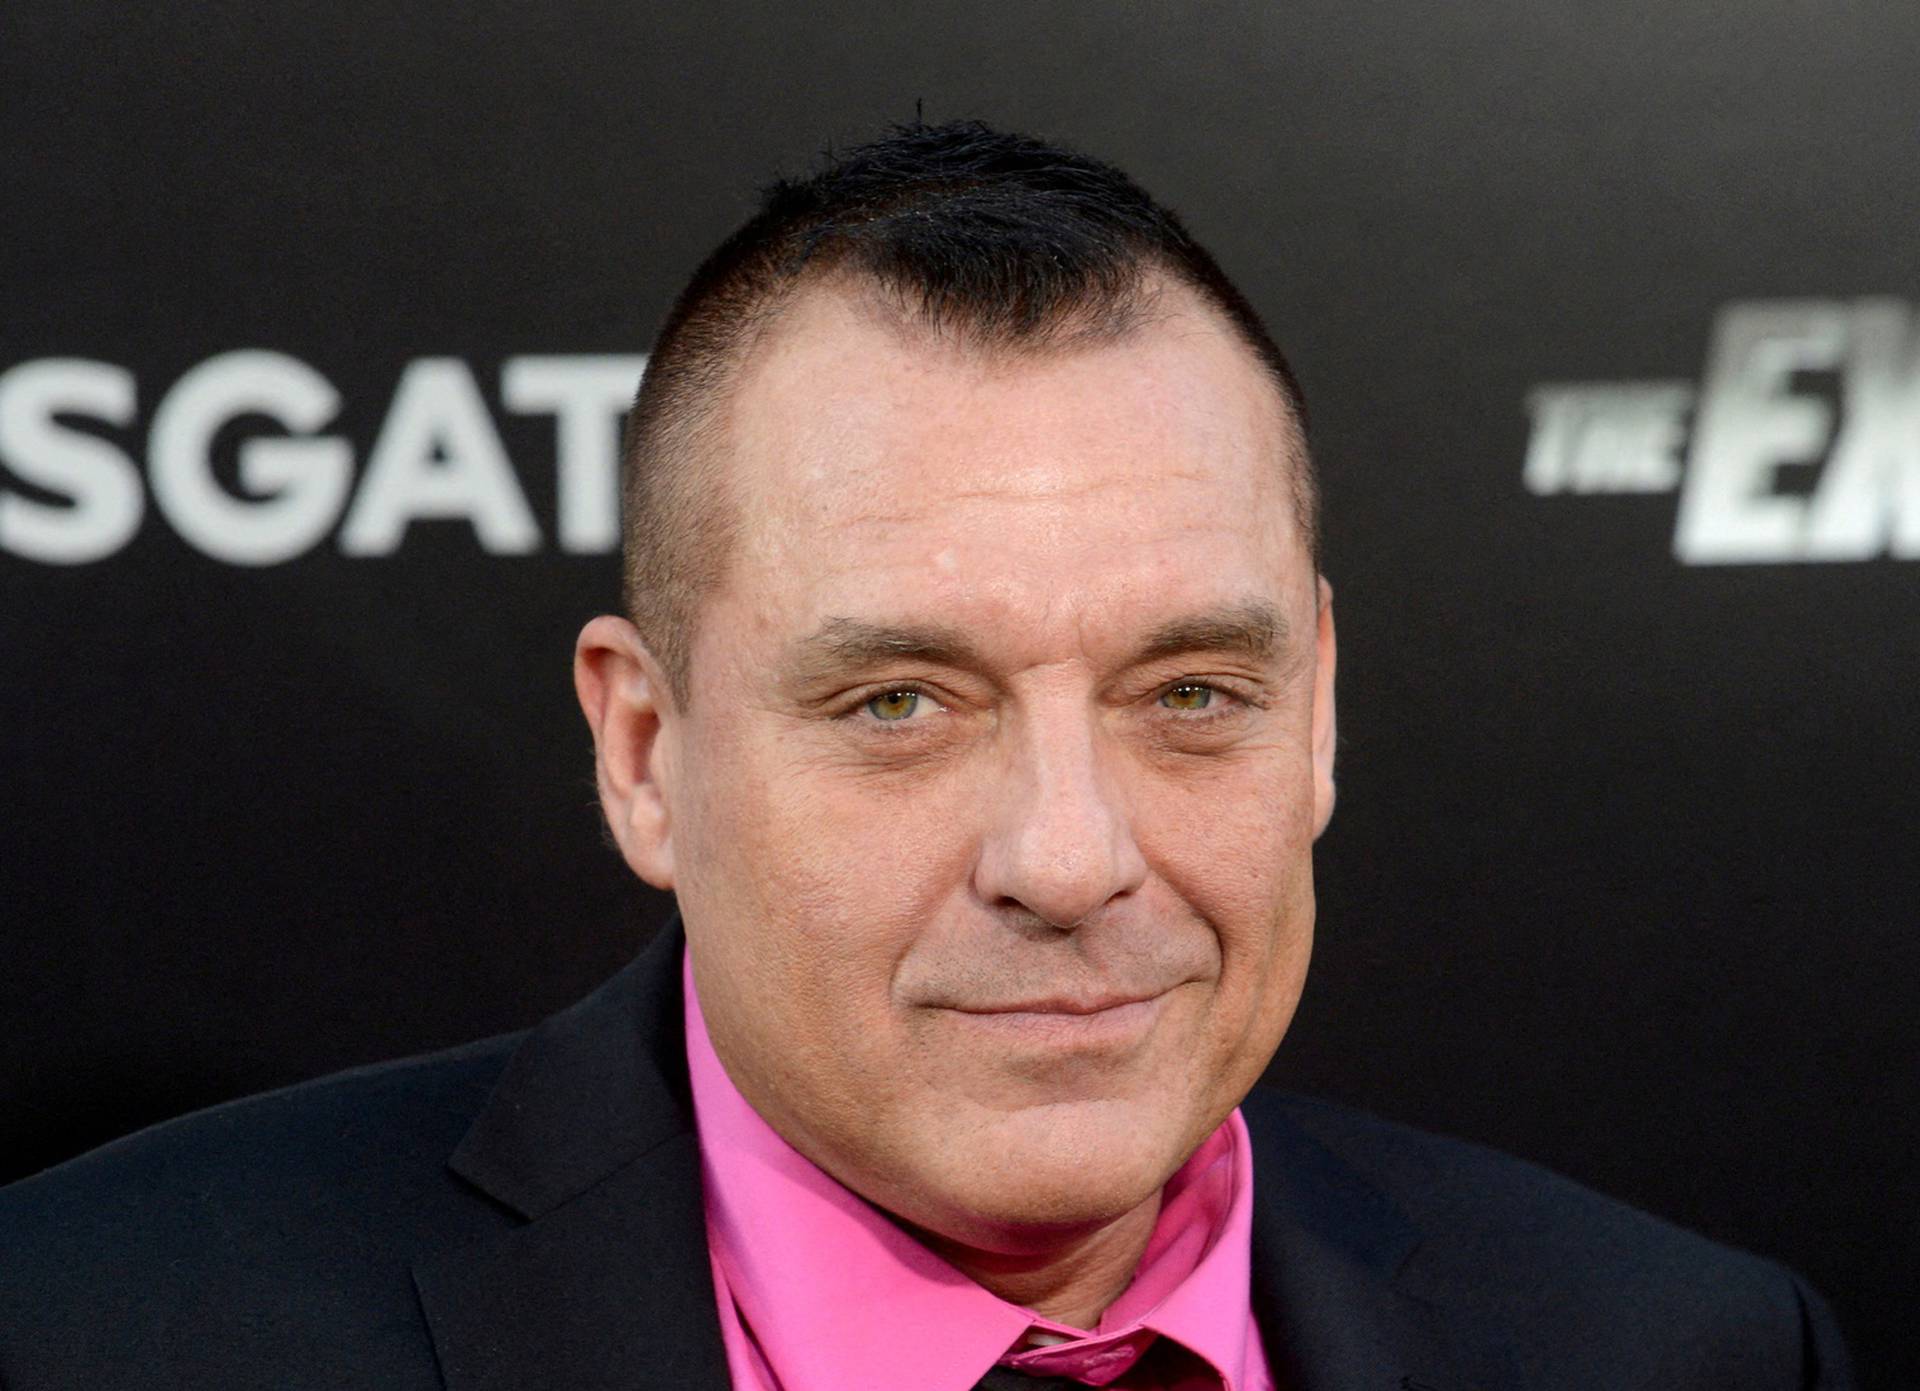 FILE PHOTO: Tom Sizemore at the premiere of "The Expendables 3" in Los Angeles